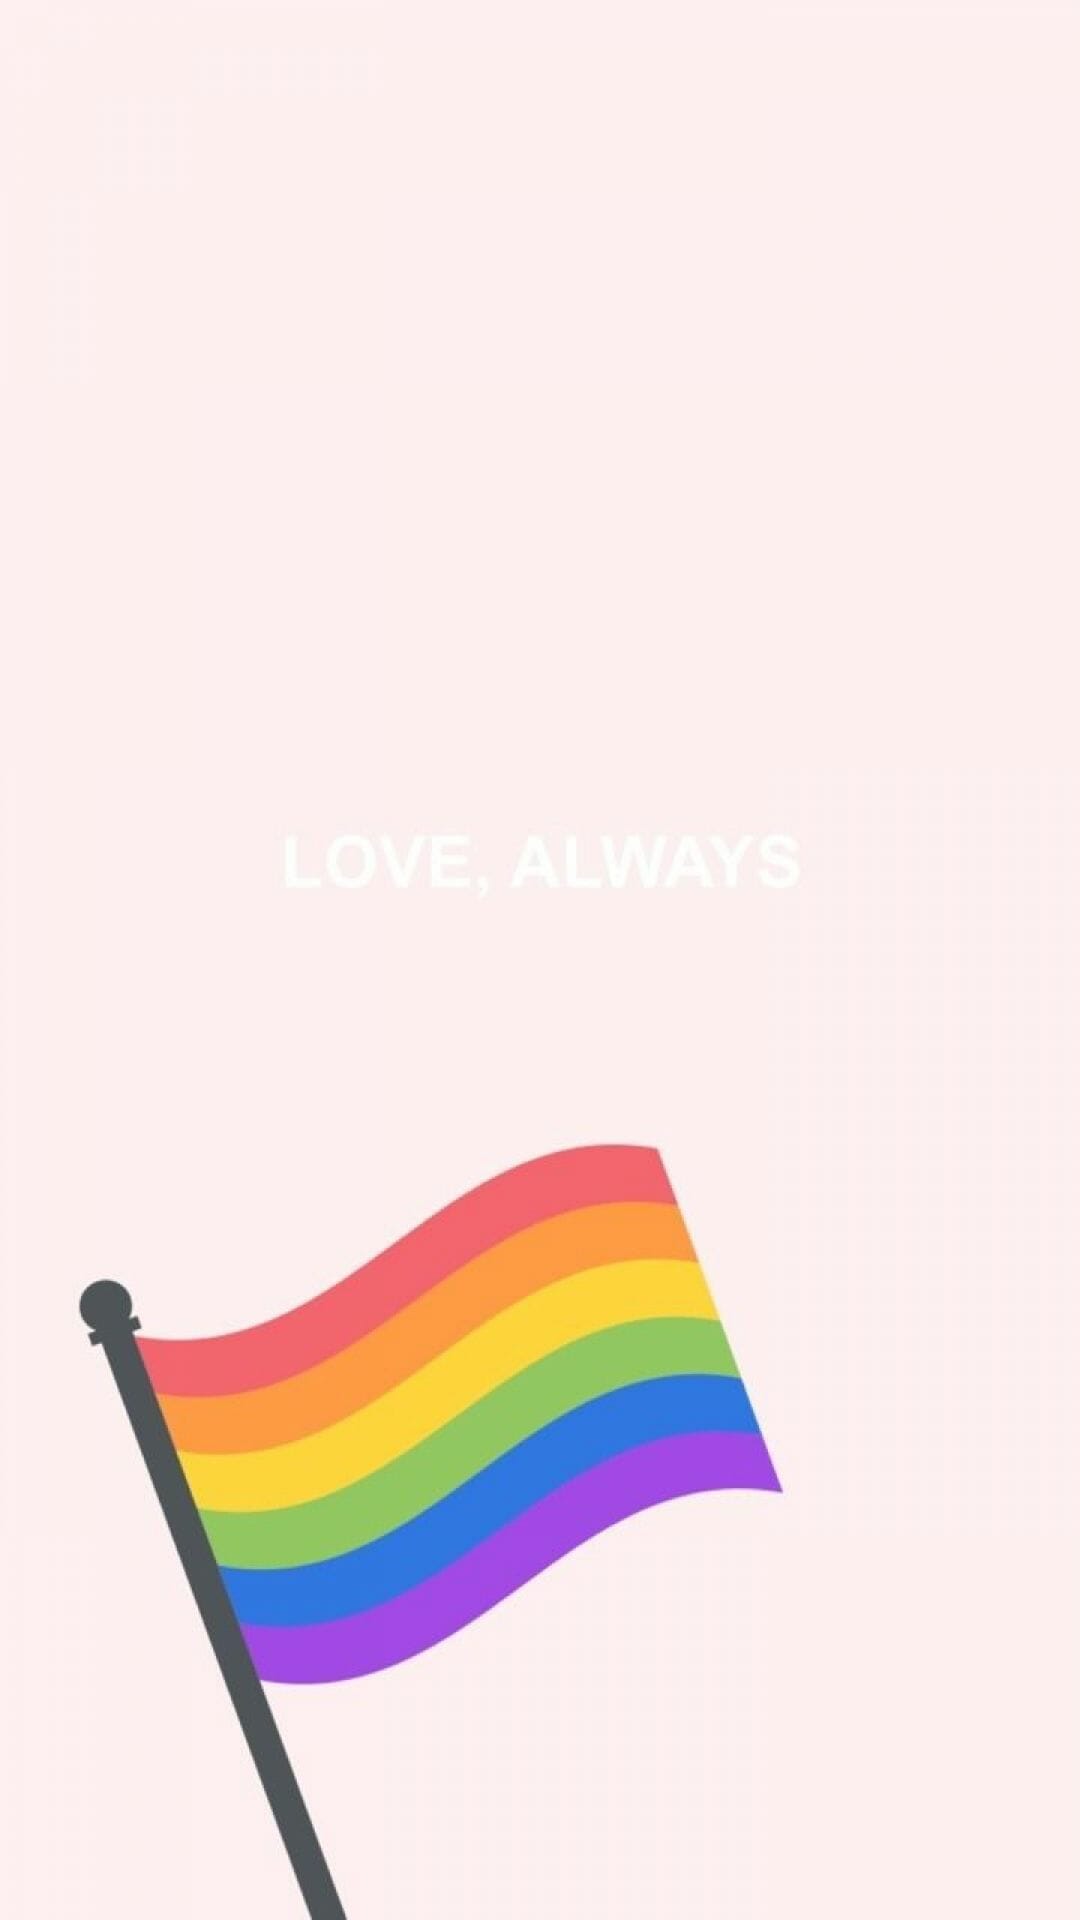 A pride flag waving in the wind with the text 